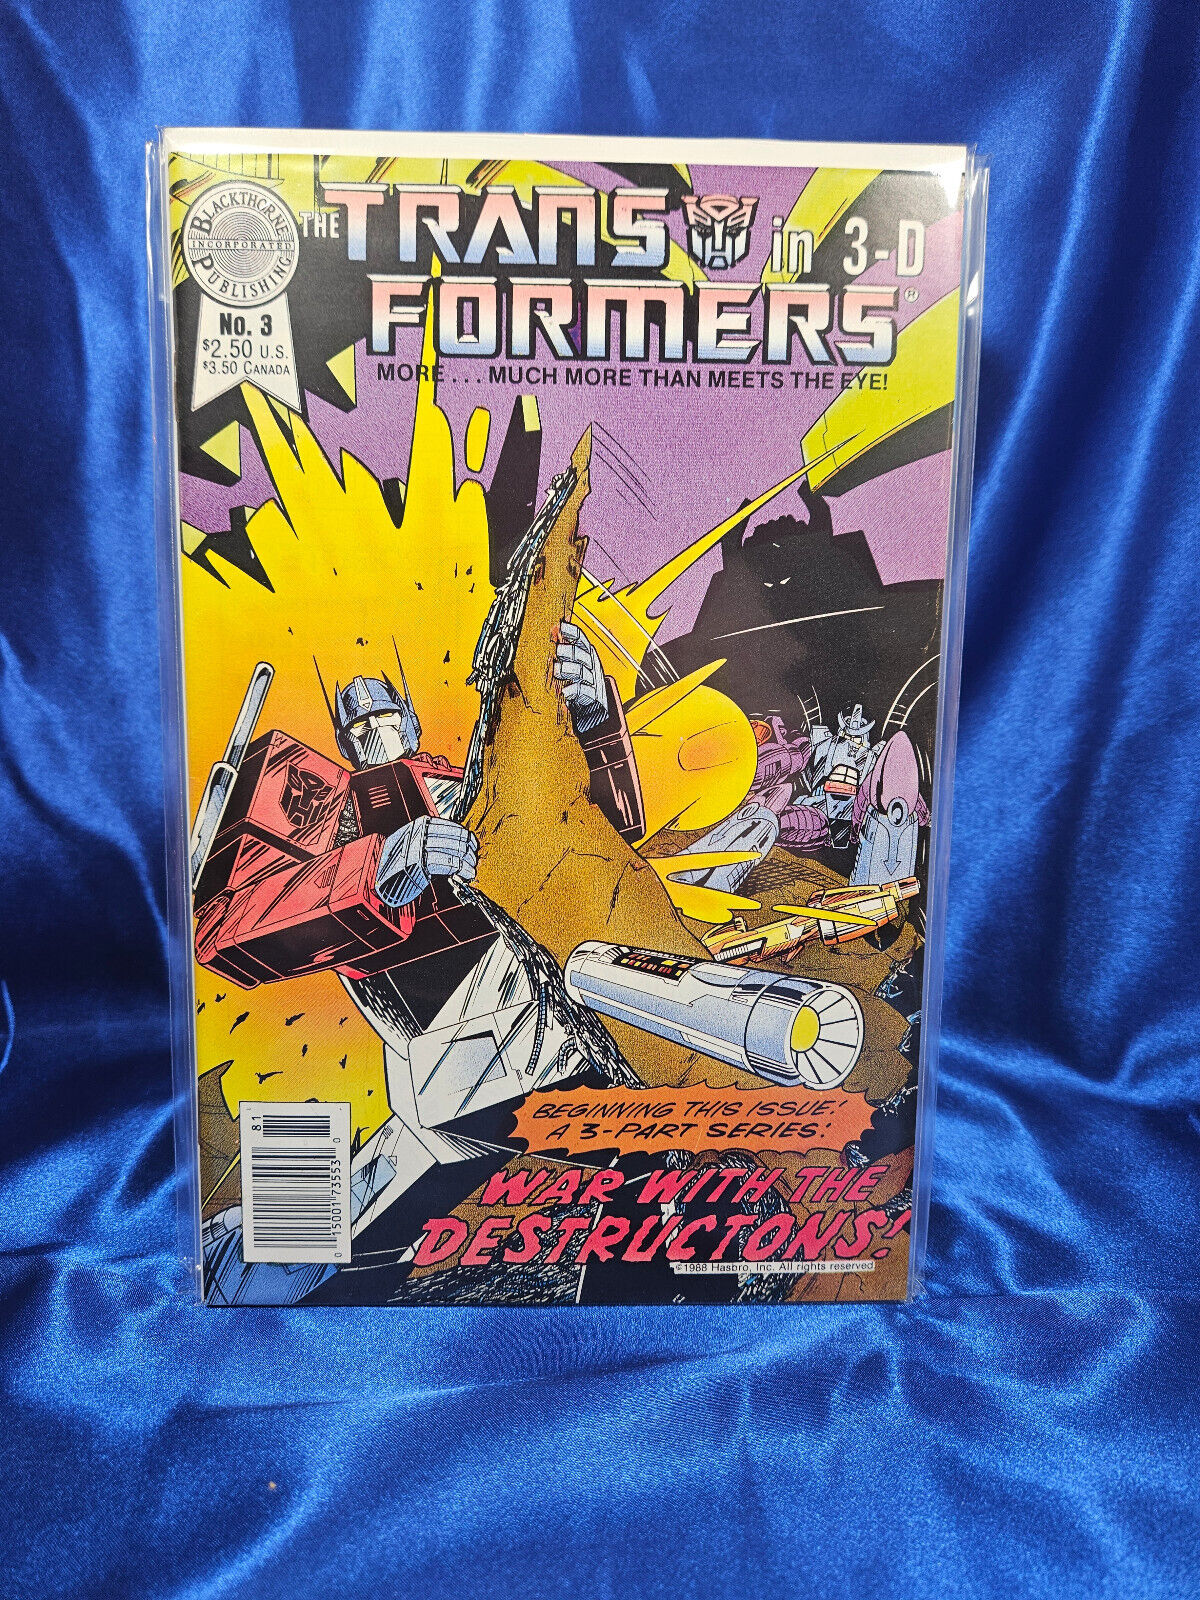 TRANSFORMERS in 3-D #3 FN/VF 7.0 BLACKTHORNE PUBLISHING March 1988